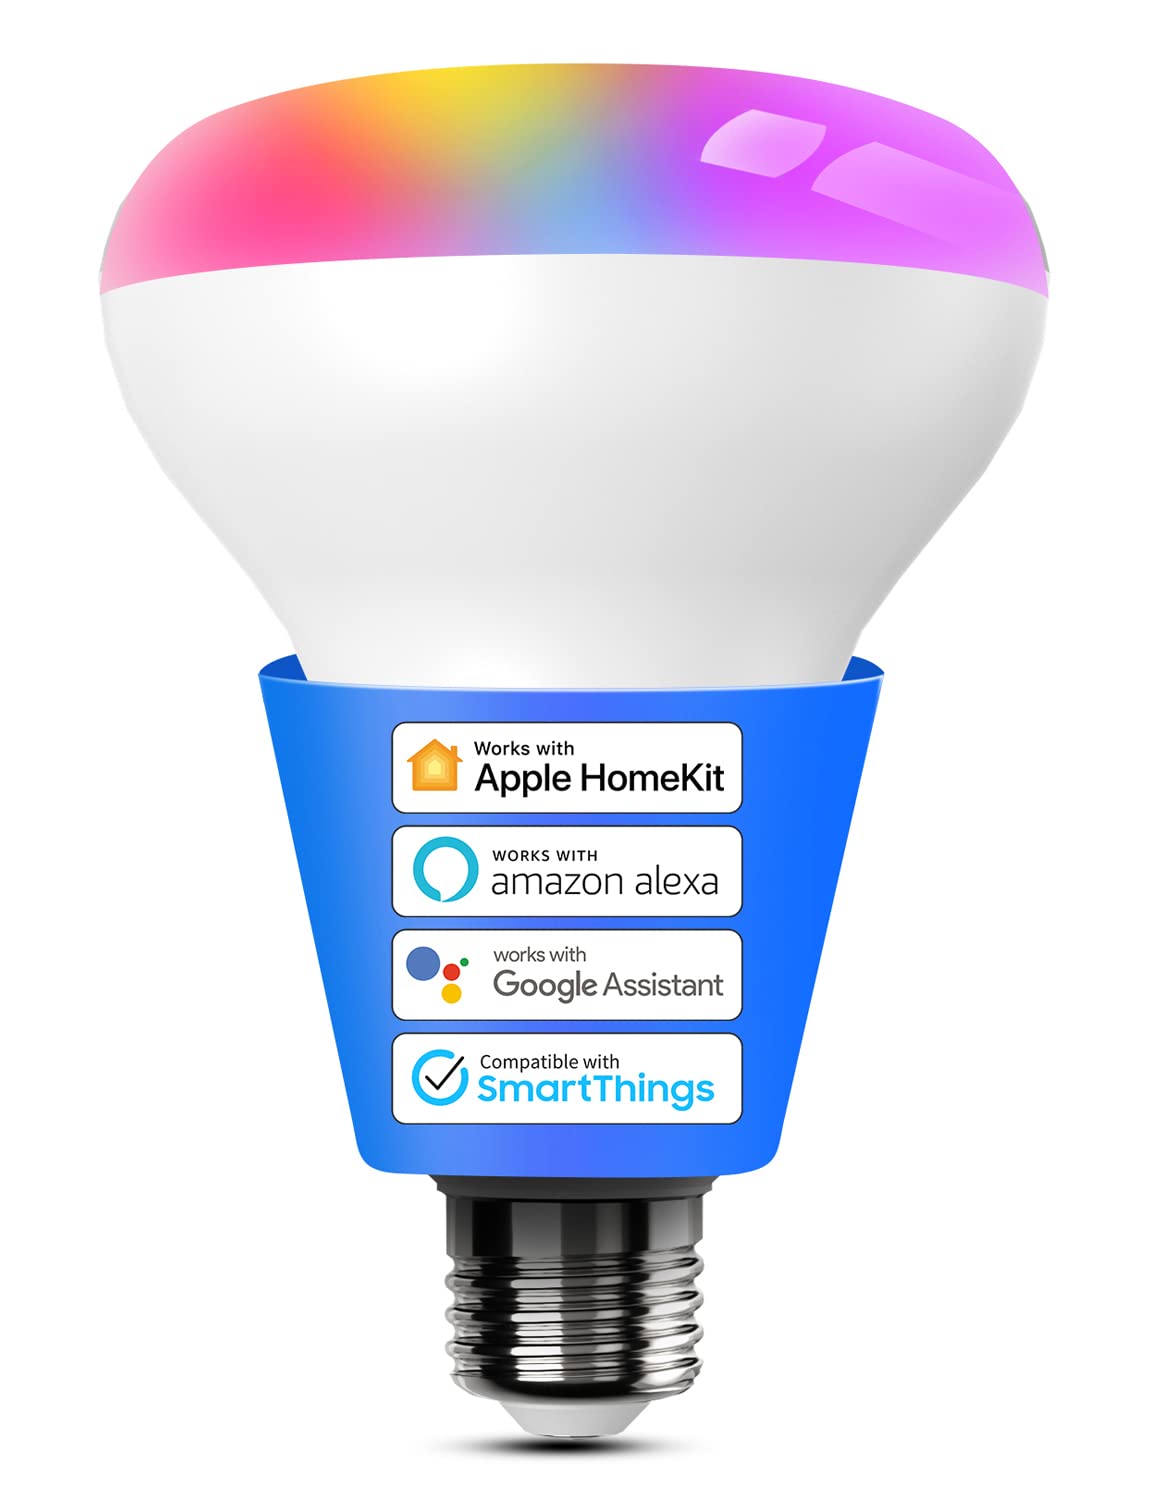 meross Smart Light Bulb, BR30 Flood WiFi LED Bulbs Compatible with Apple HomeKit, Alexa, Google Assistant & SmartThings, Dimmable E26 Multicolor 2700K-6500K RGBCW, 1300 Lumens 100W Equivalent, 1 Pack